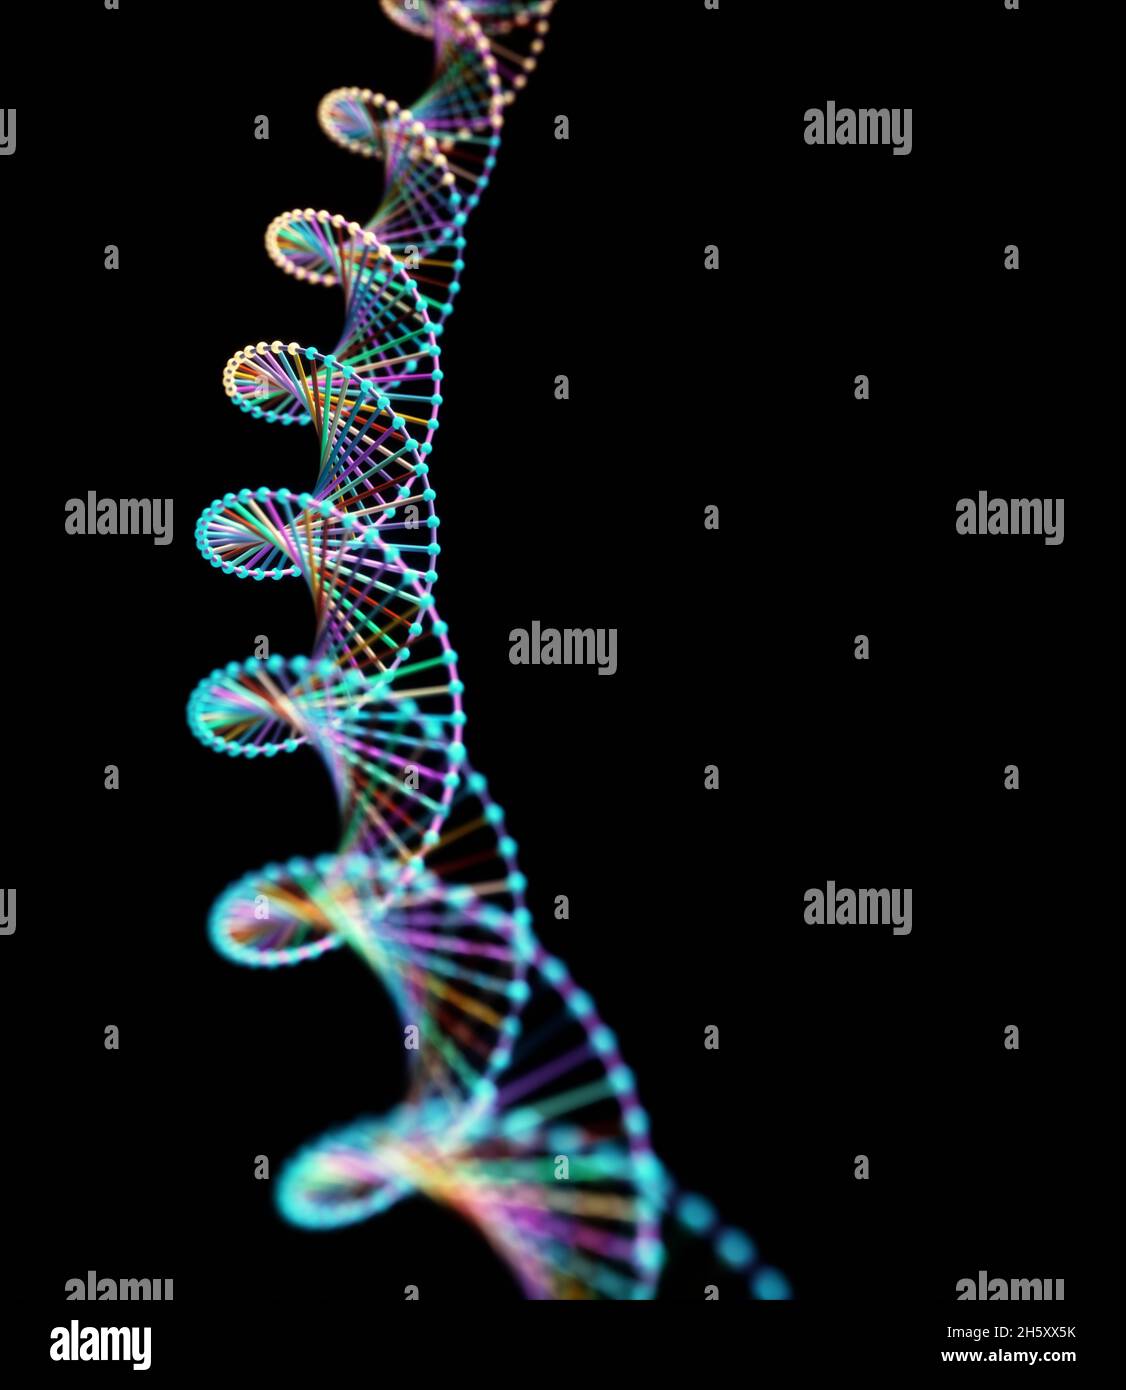 Abstract image of genetic codes DNA. Concept image for use as background. 3D illustration. Stock Photo